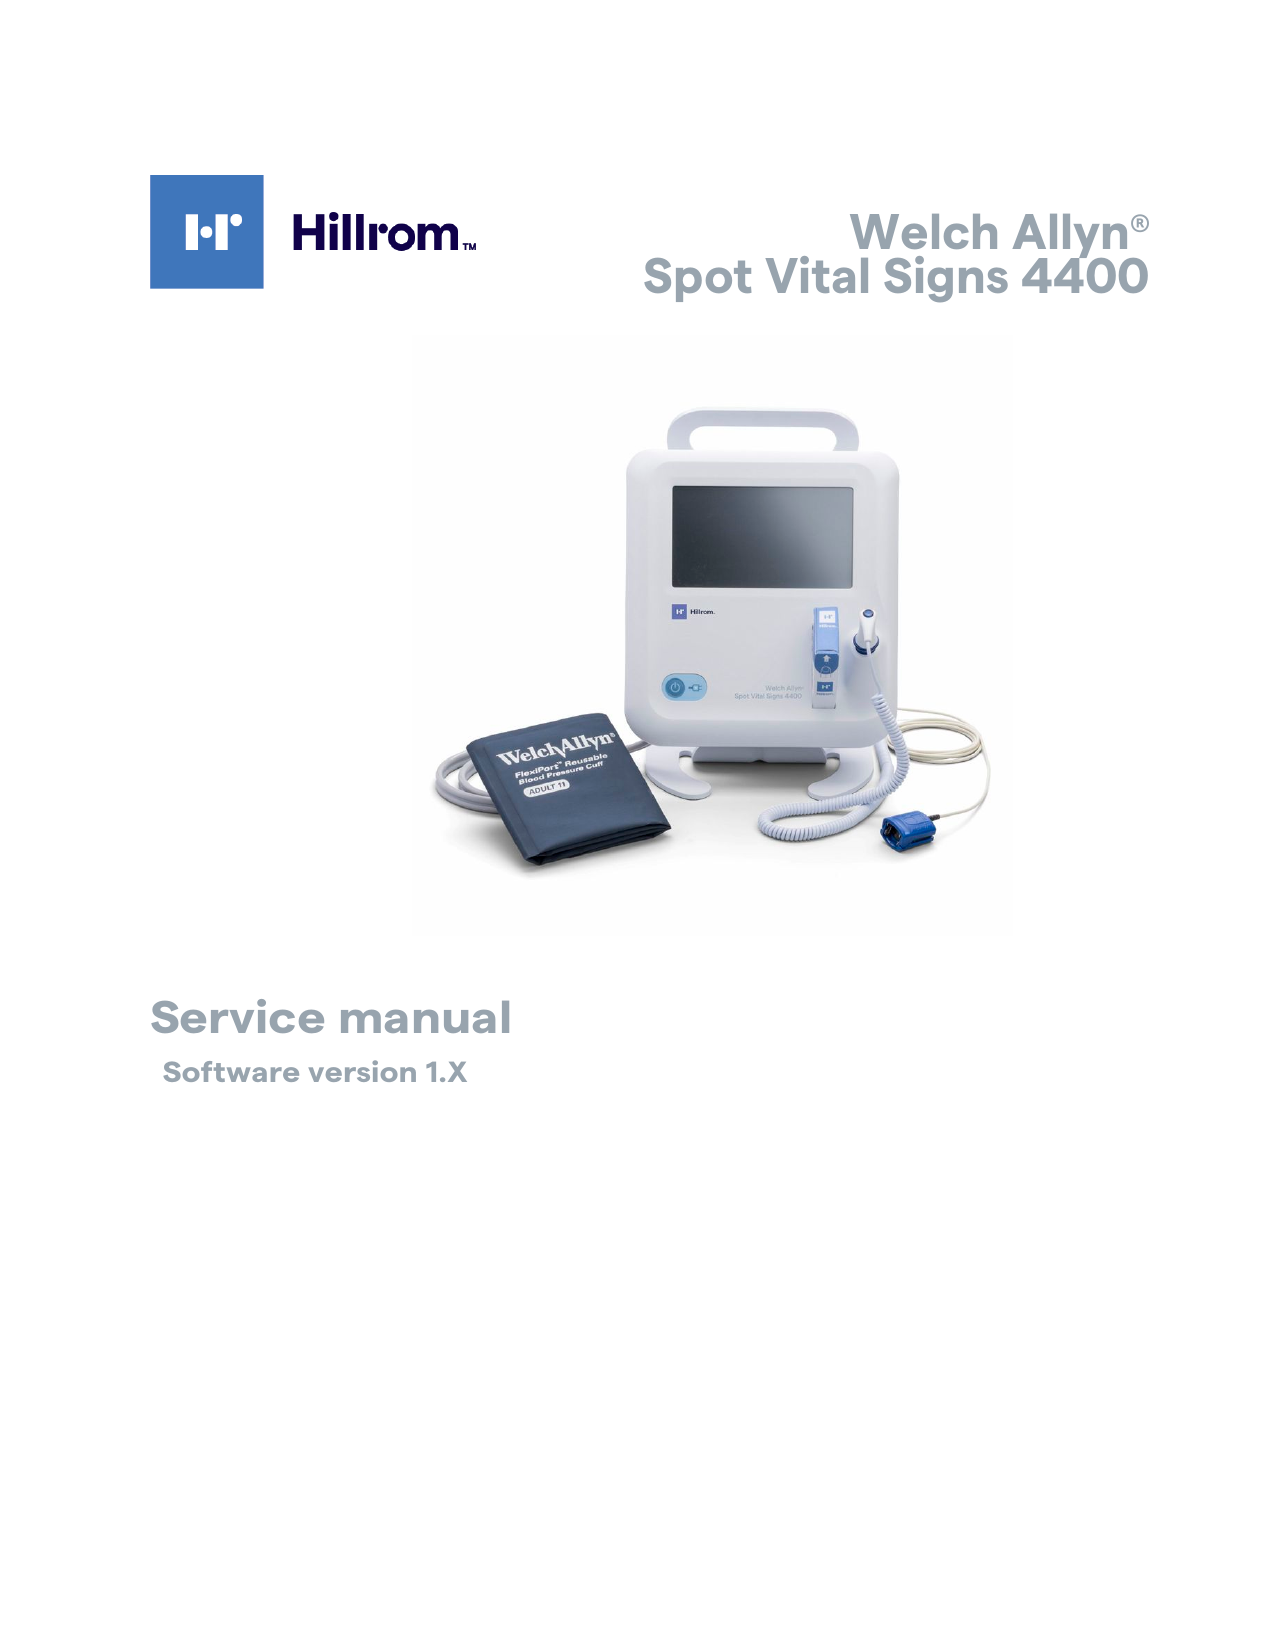 welch allyn spot vital signs lxi post error detected